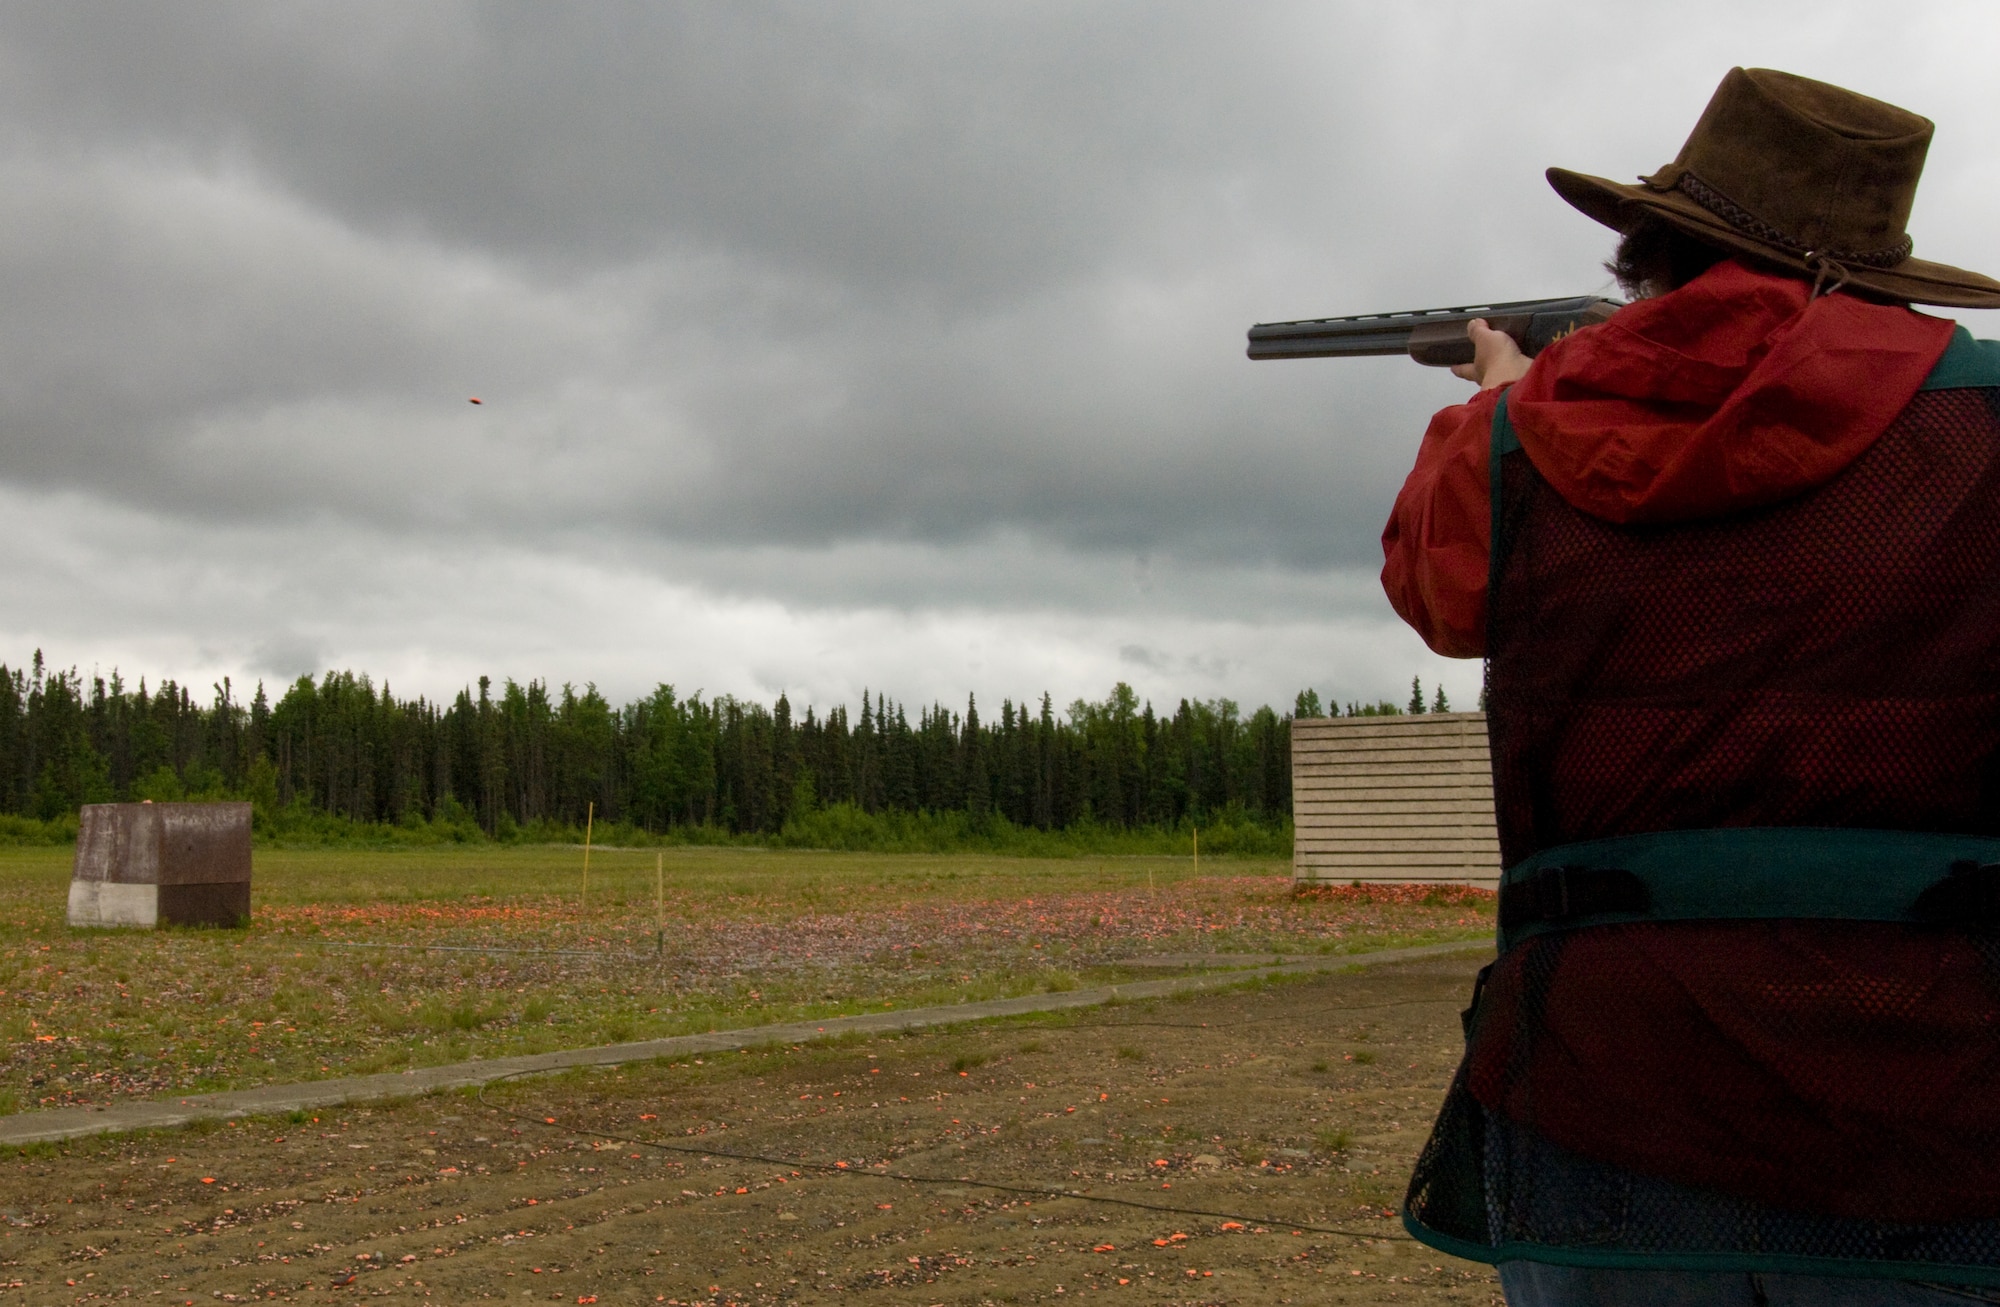 ELMENDORF AIR FORCE BASE, Alaska -- Senior Master Sgt. Mary Bousson, Alaskan Command, takes a shot at a clay pigeon during the Alaska Skeet State Championship July 13. This shoot was Sergeant Bousson's fifth in her four years of shooting. (U.S. Air Force photo/Airman 1st Class David Carbajal)